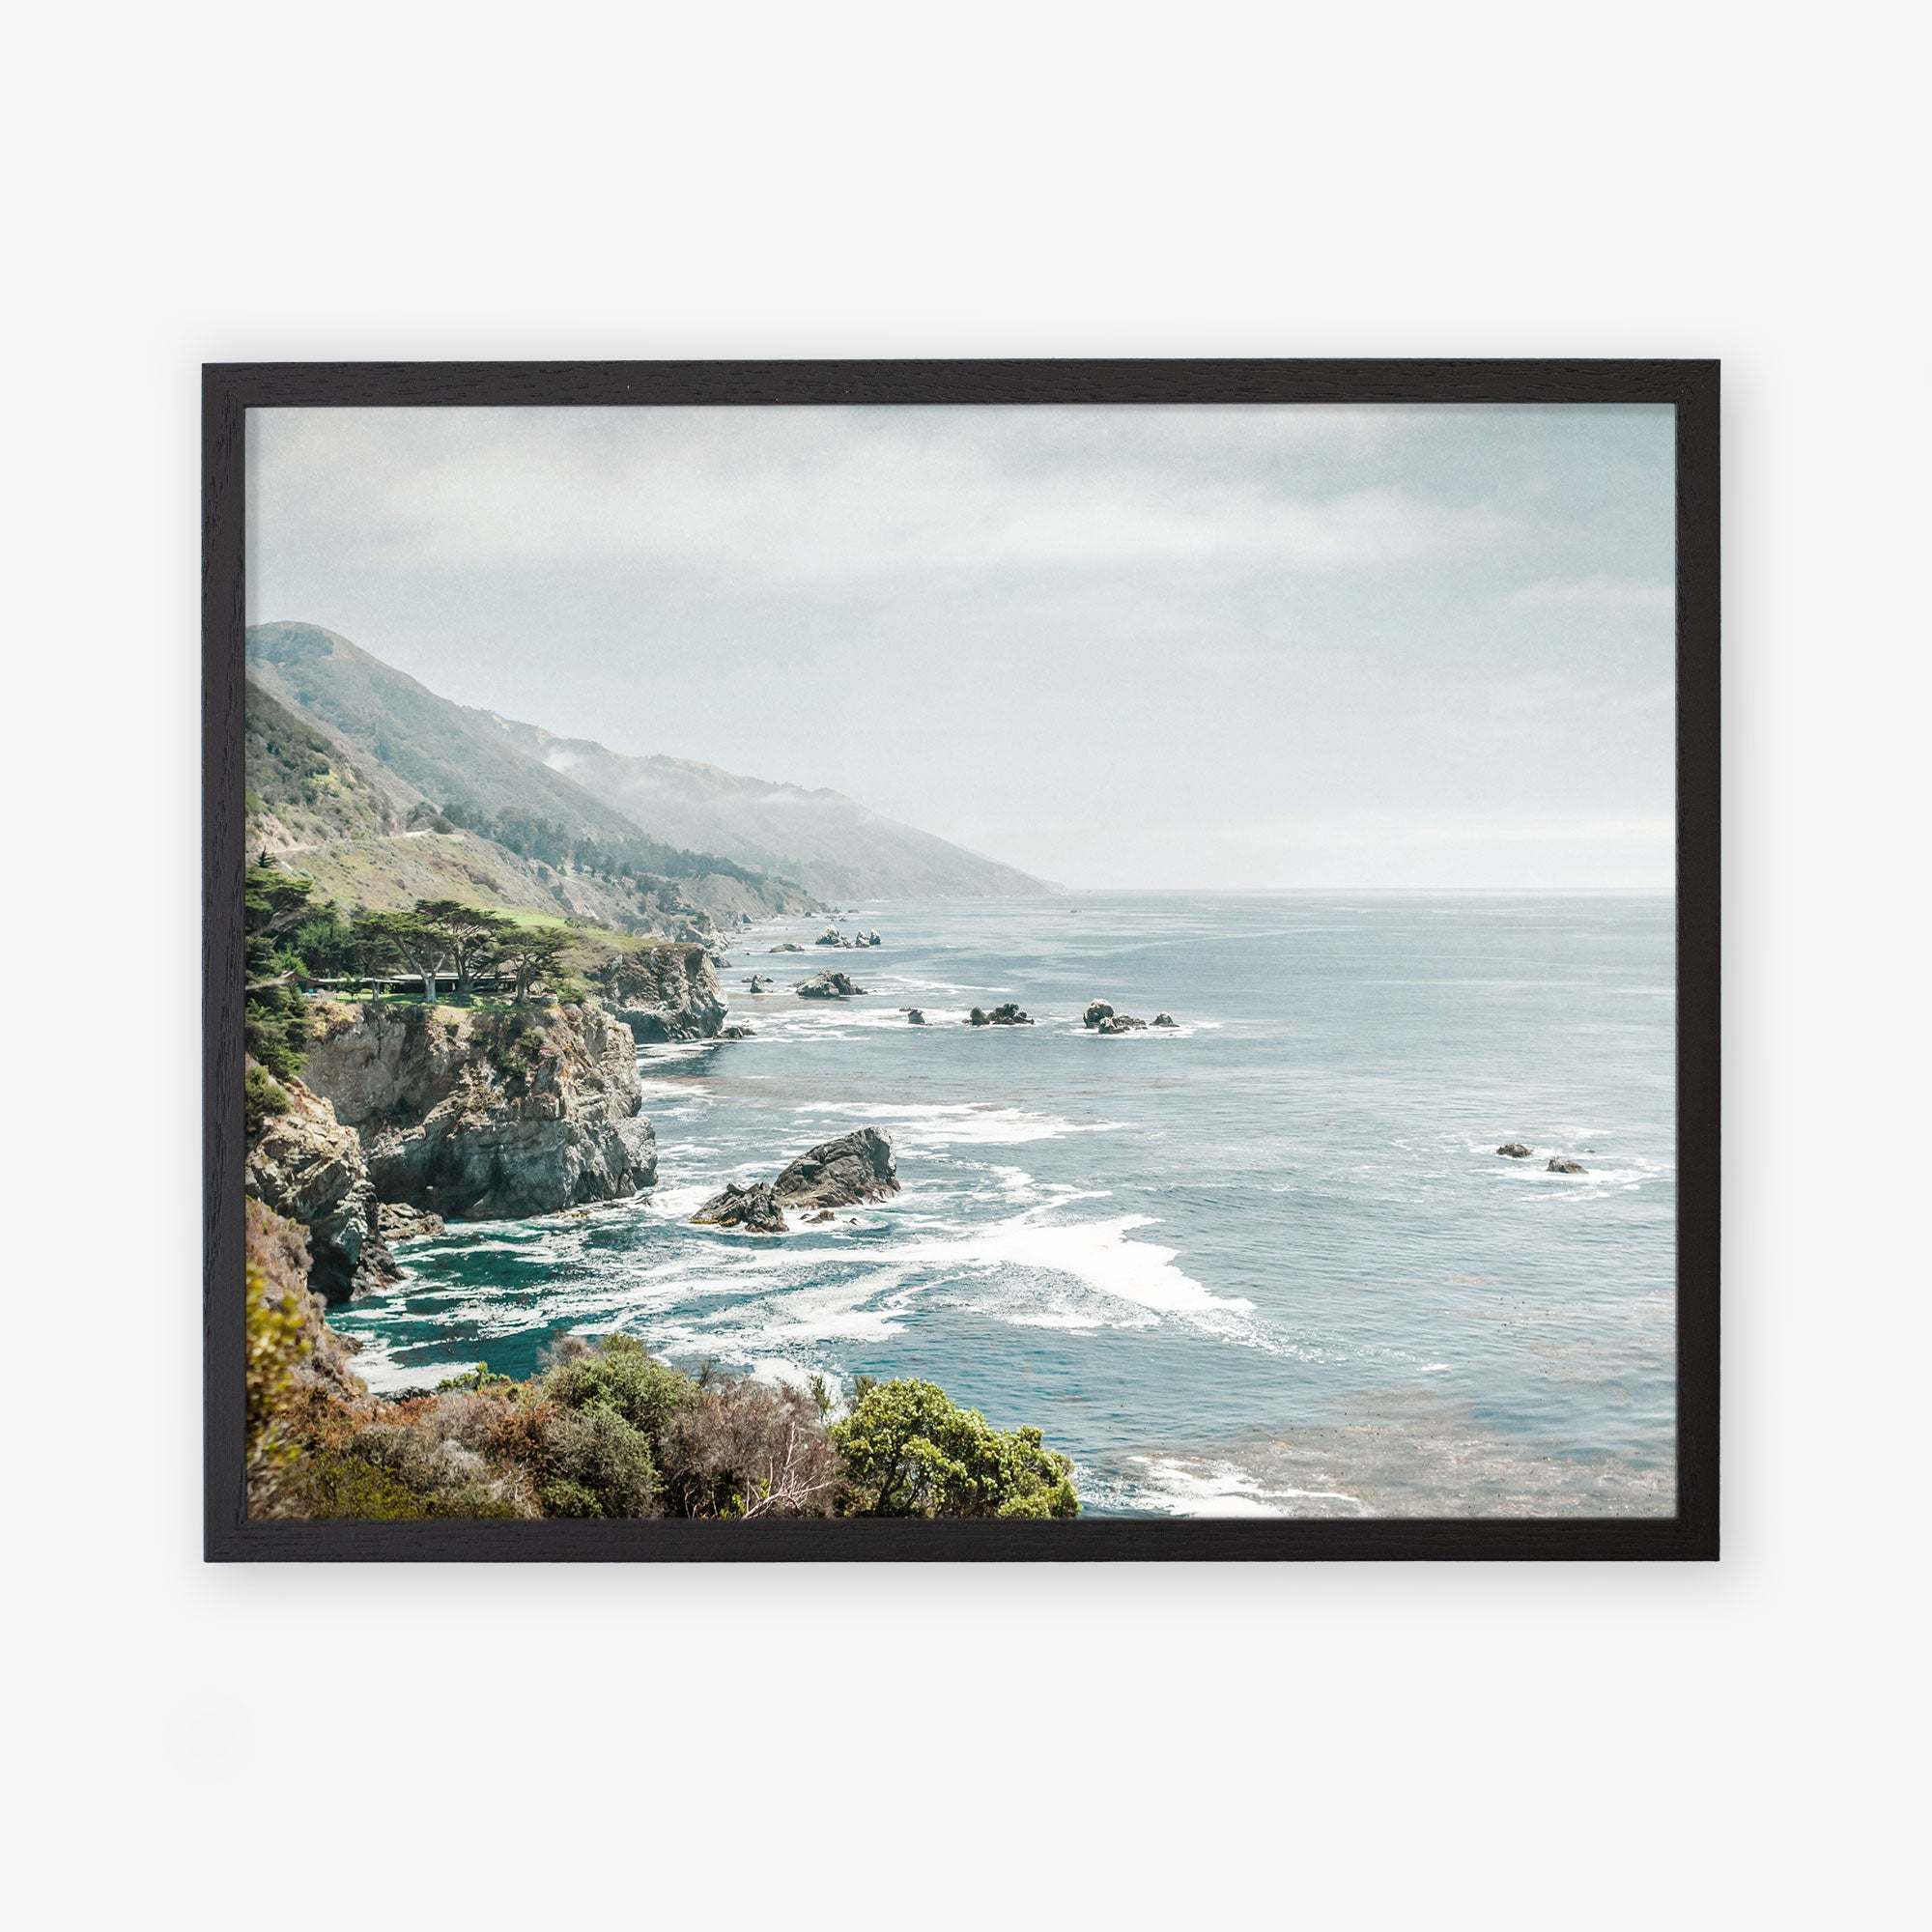 A framed archival photographic print depicting a scenic coastal view of Big Sur with rugged cliffs and a serene ocean under a hazy sky, showcasing the natural beauty of California Highway 1. This is the Offley Green &#39;Rocky Rocks&#39; Big Sur Landscape Print.